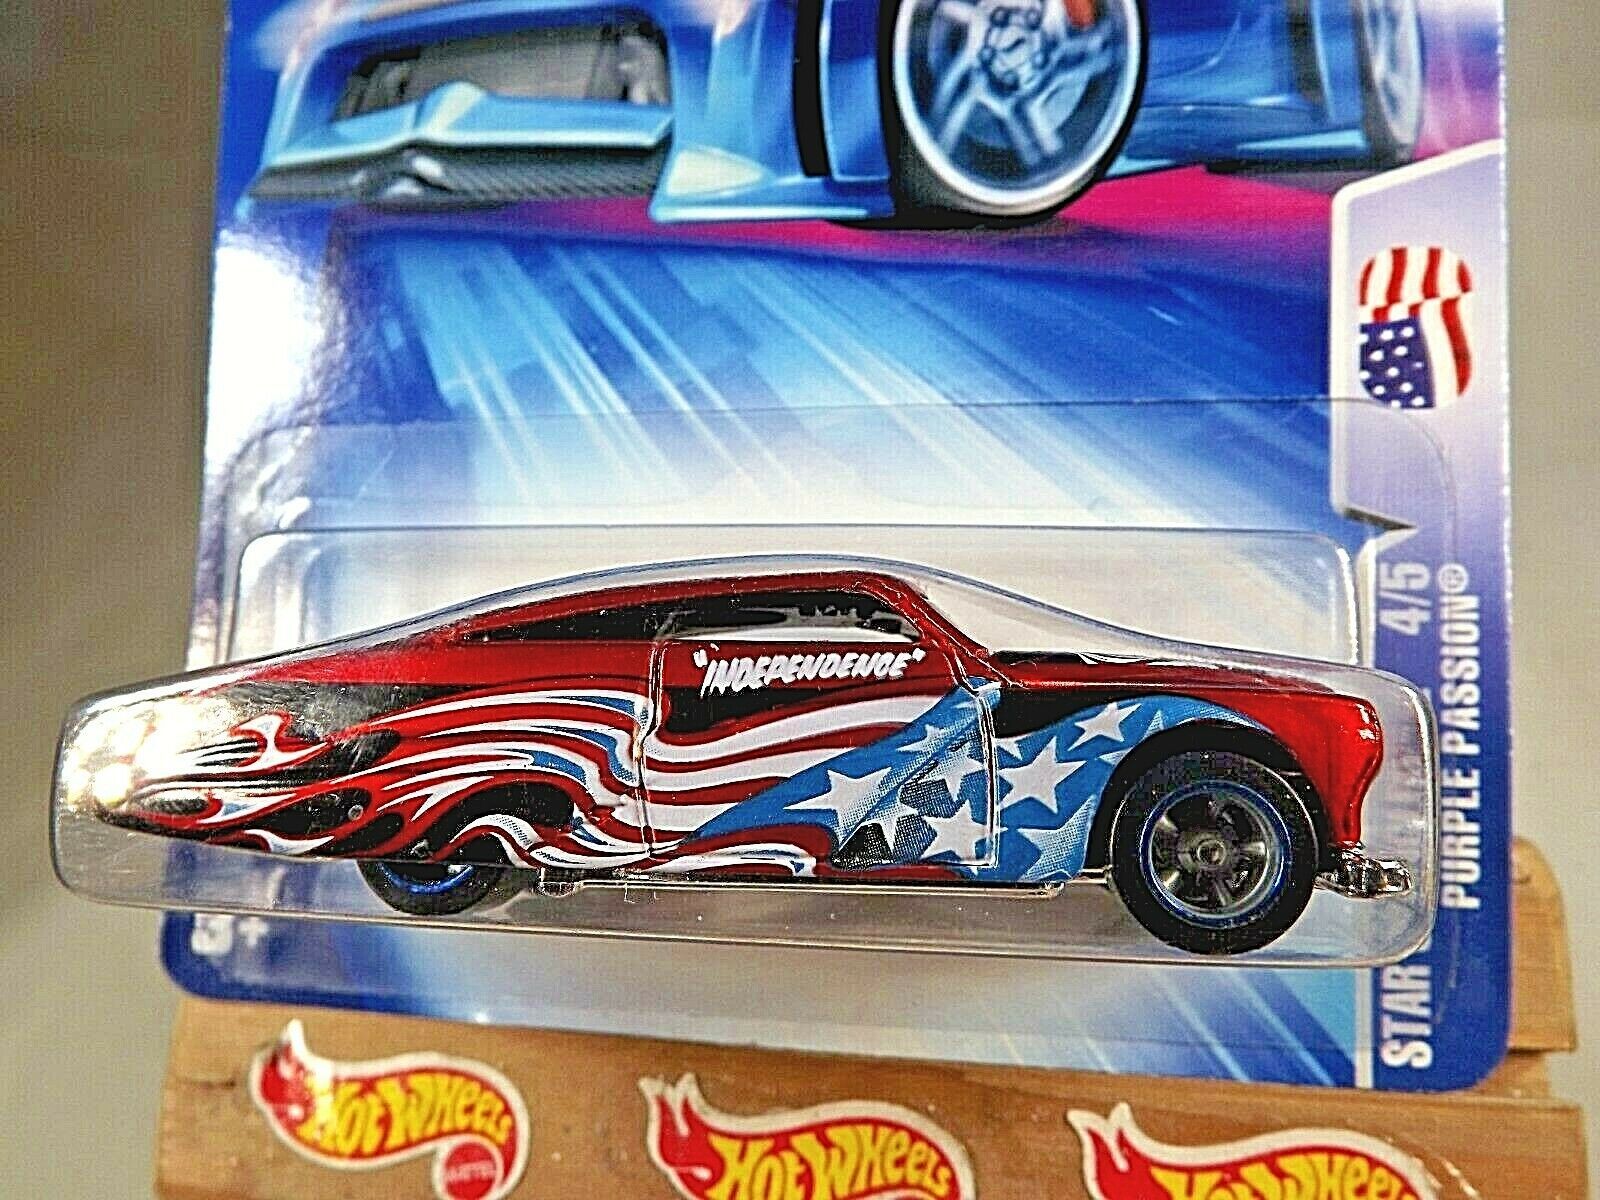 2004 Hot Wheels 126 Star Spangled 2 45 Purple Passion Red Wgray Co Mold 5 Sp Contemporary 2838